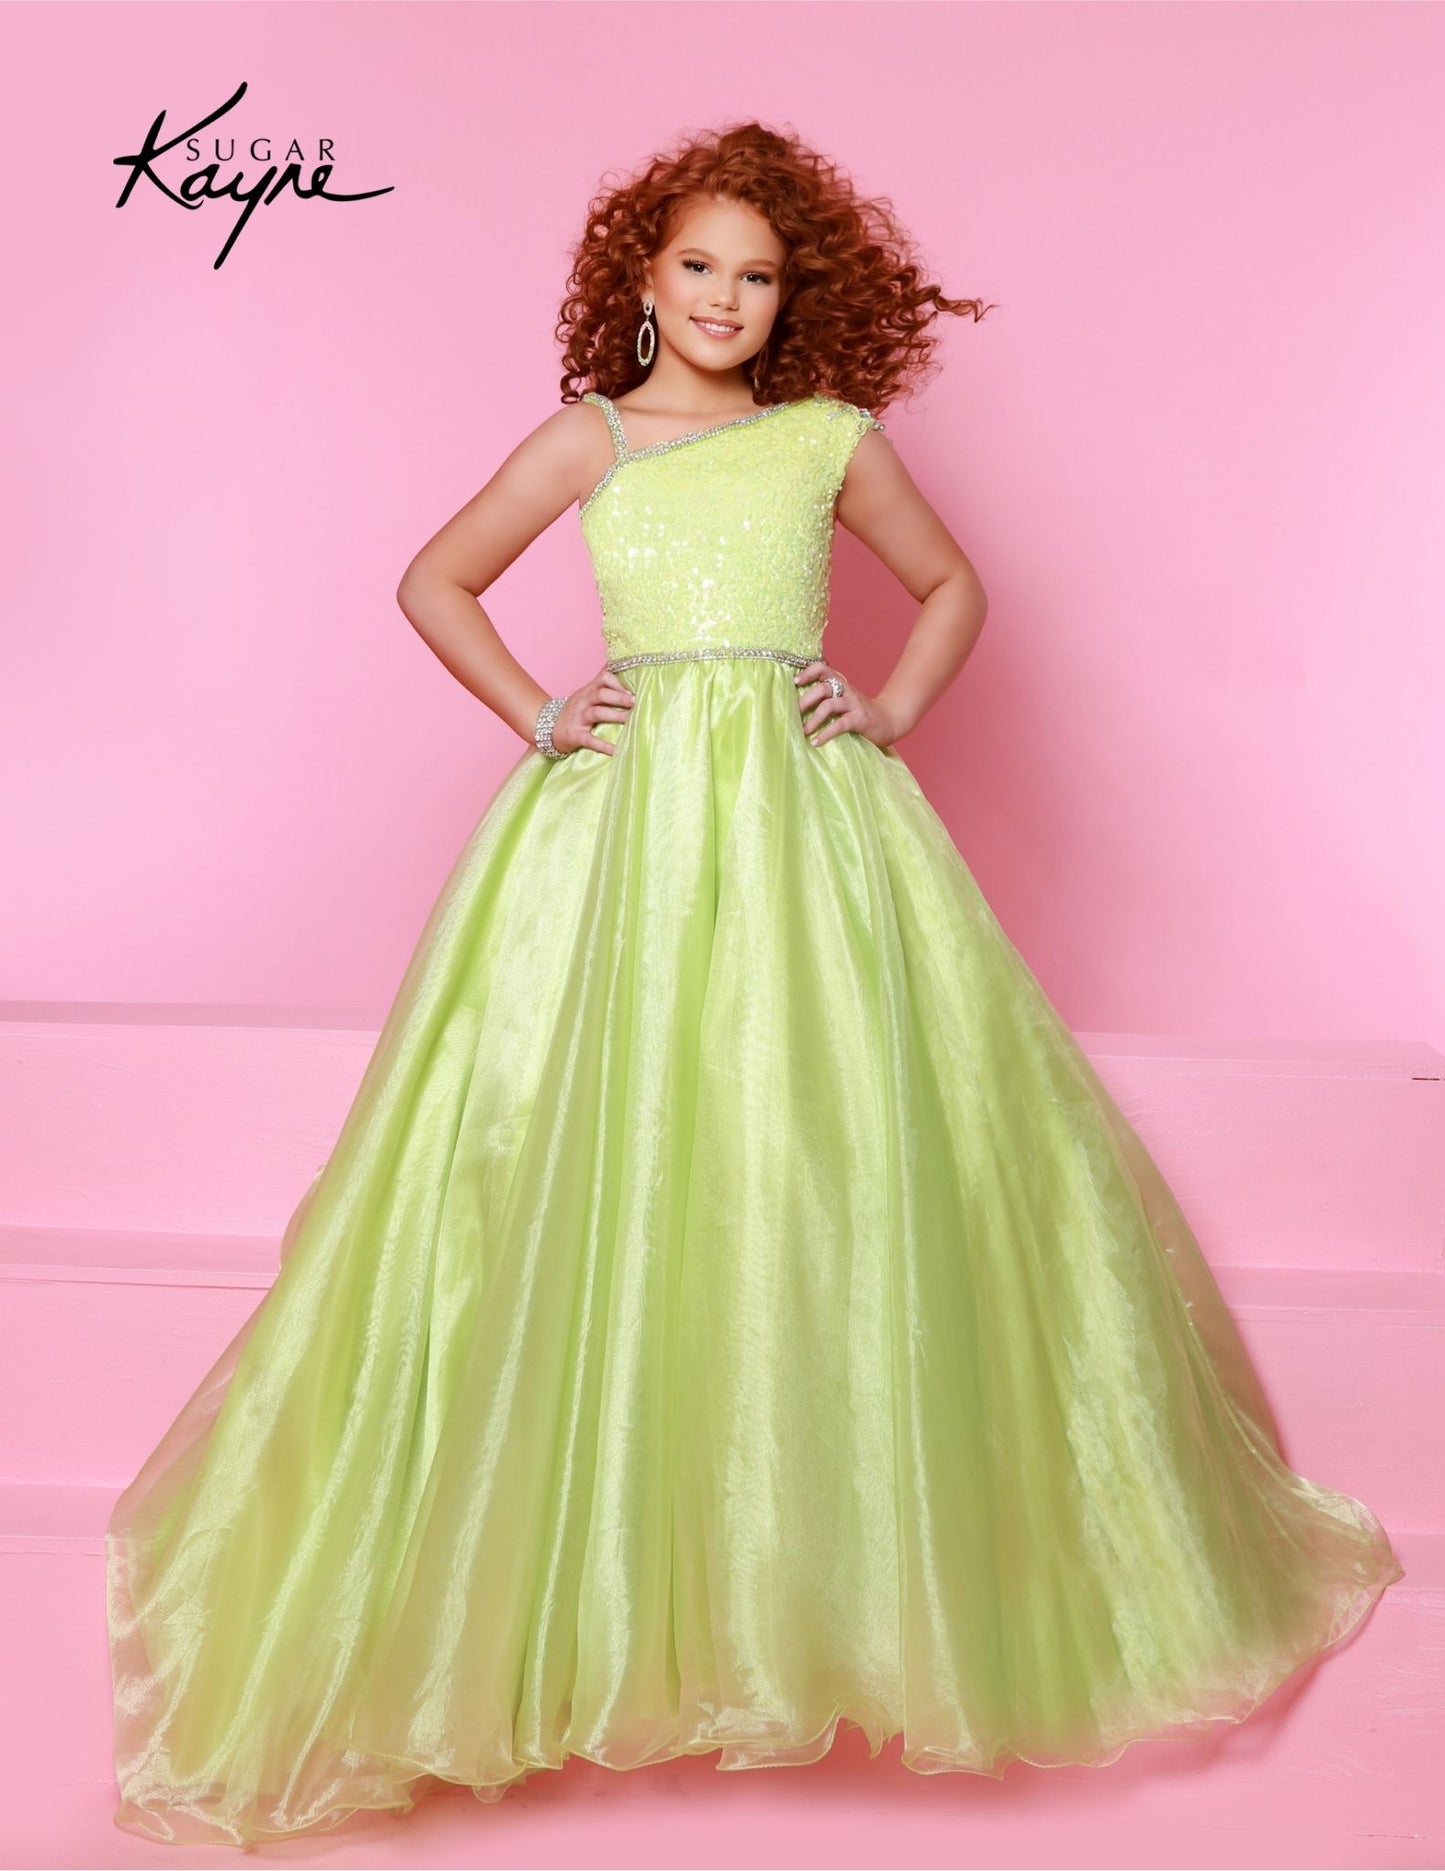 Sugar Kayne C348 is a stylish and elegant long girls preteen pageant dress. It has an A-line silhouette with a one-shoulder ballgown sequin top and train. Special details include a sequin-encrusted neckline for a beautiful finish. Perfect for any special occasion. Become the dazzling diva you are! This Sequin Mesh and Poly Organza Ballgown skirt is perfect for pageant competitions and winning hearts.